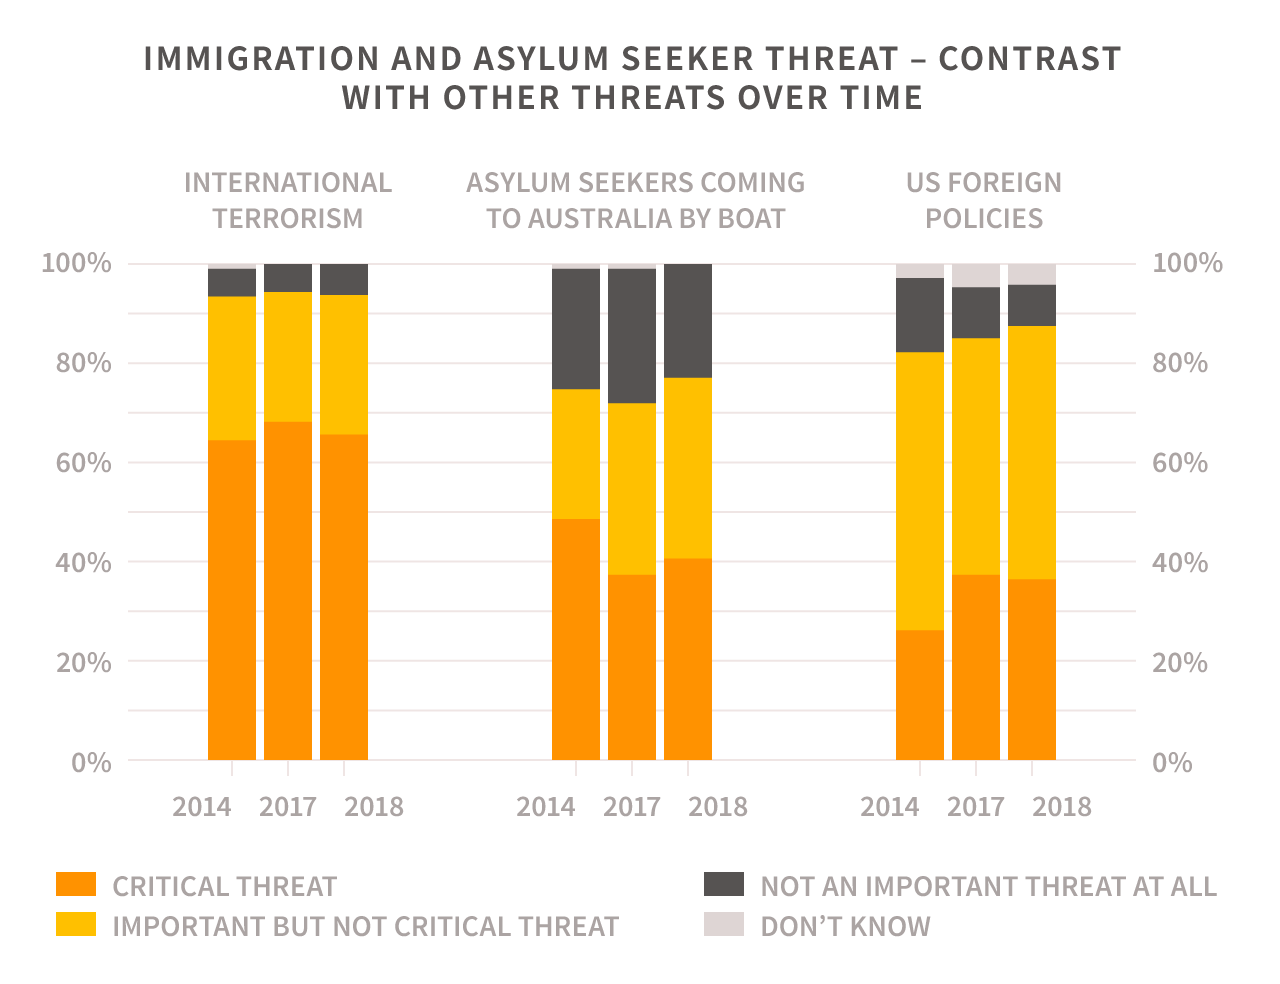 IMMIGRATION AND ASYLUM SEEKER THREAT – CONTRAST WITH OTHER THREATS OVER TIME